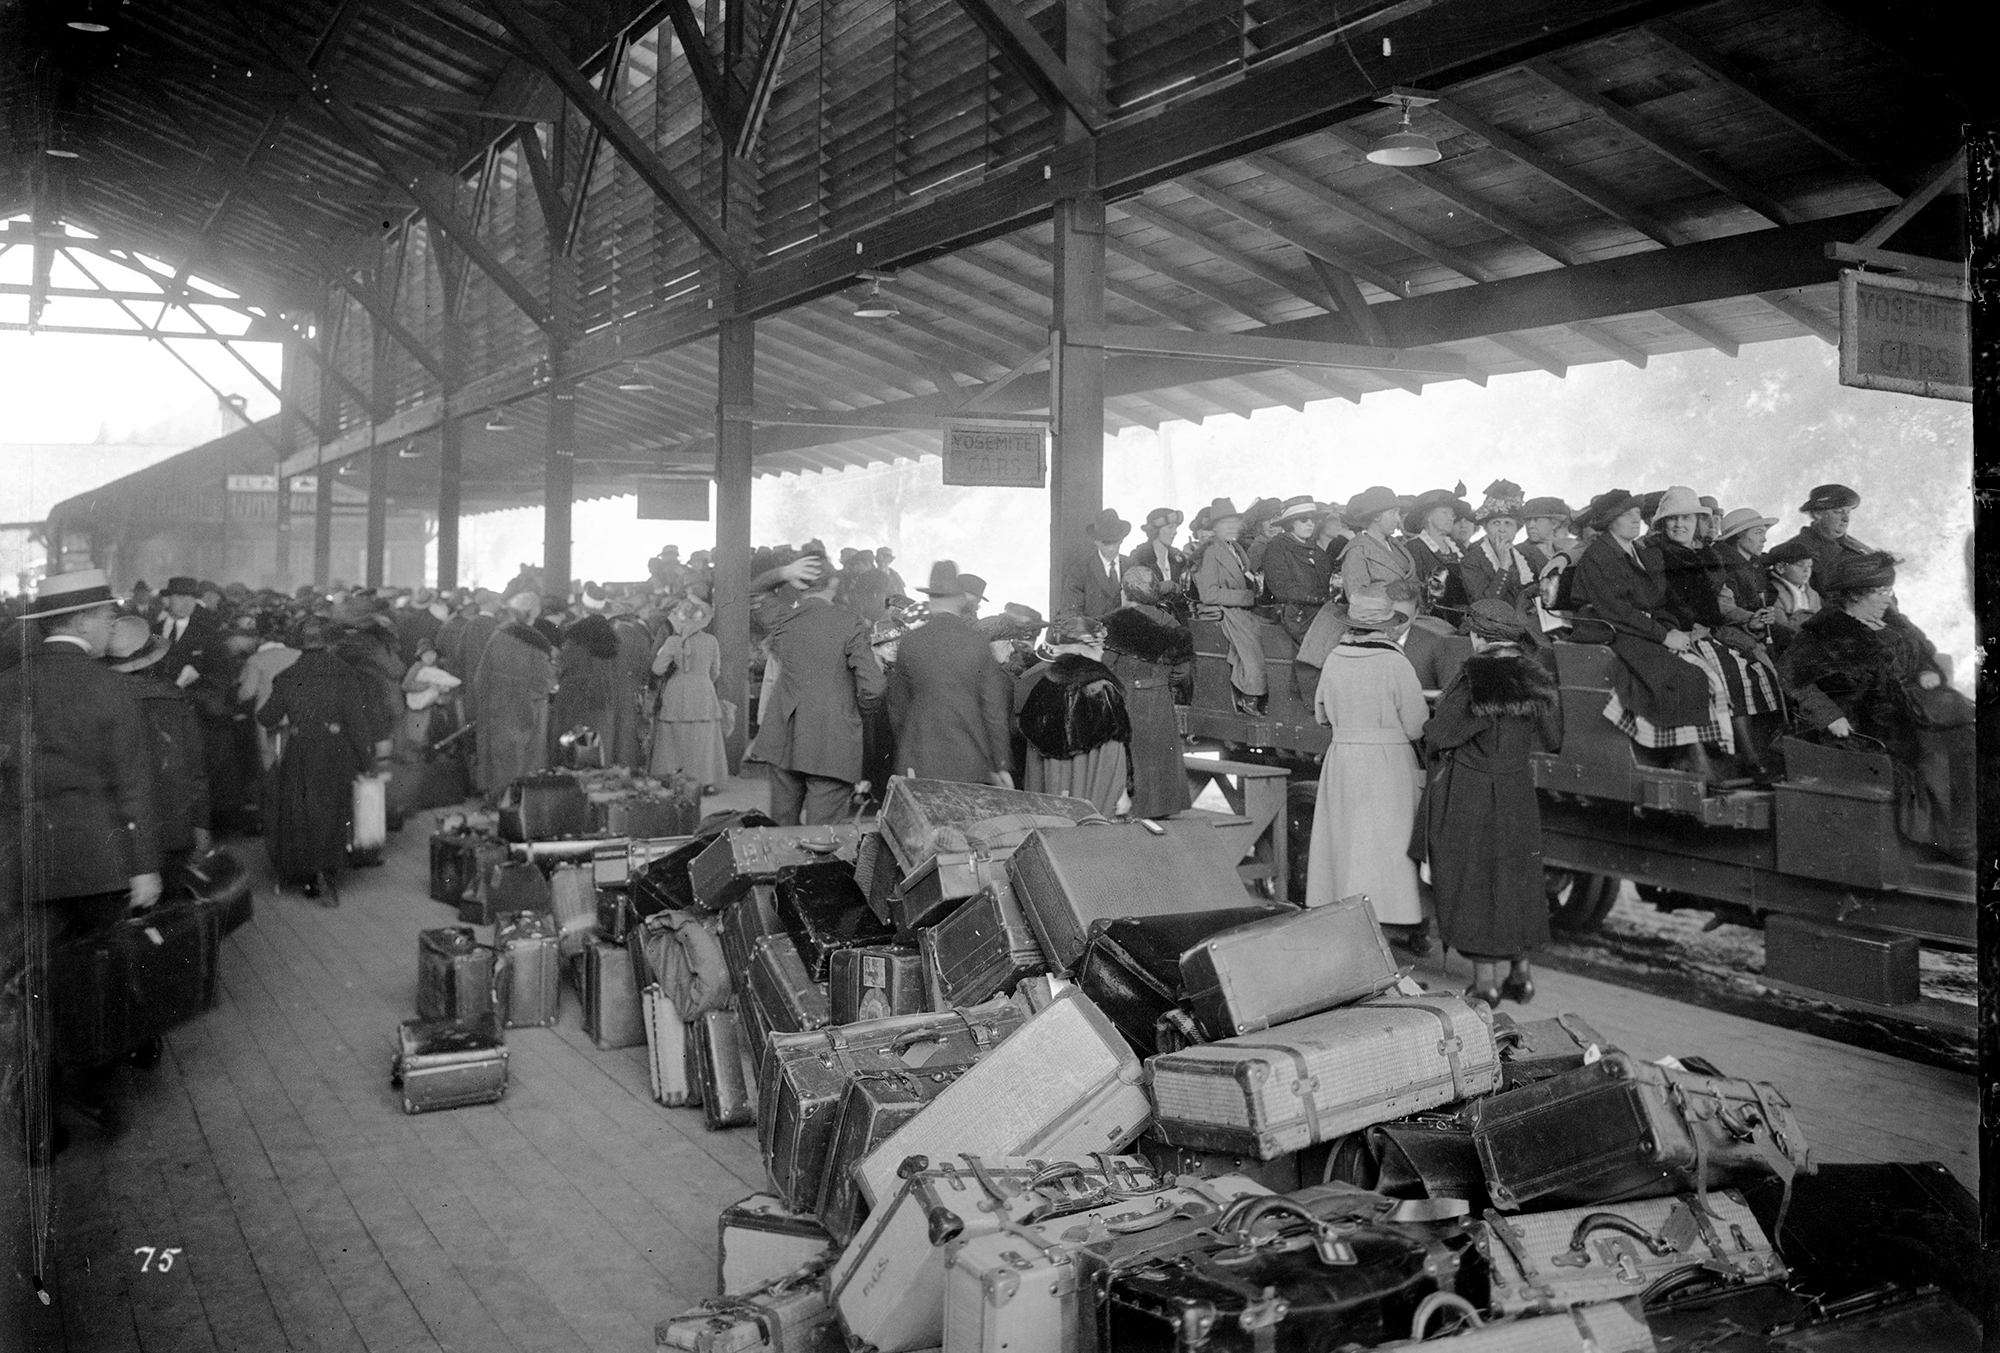 A black and white photo of a crowded train platform covered in suitcases, with passengers loaded onto 1910s-style buses